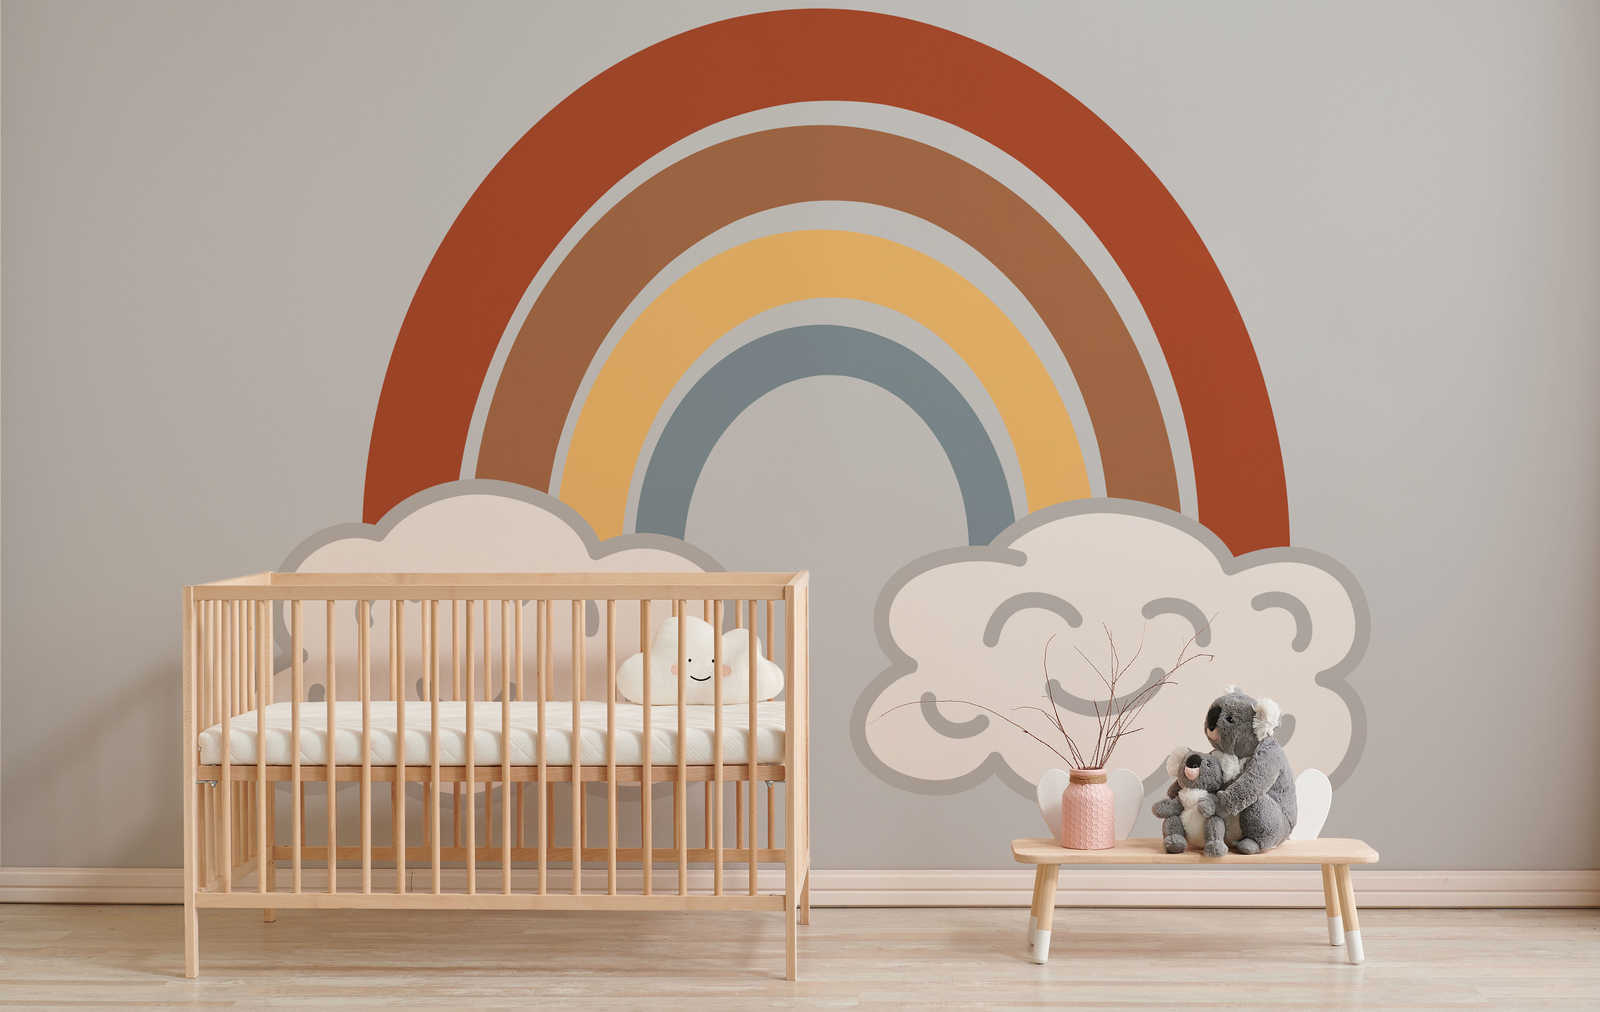         Photo wallpaper neutral rainbow on clouds for kids
    